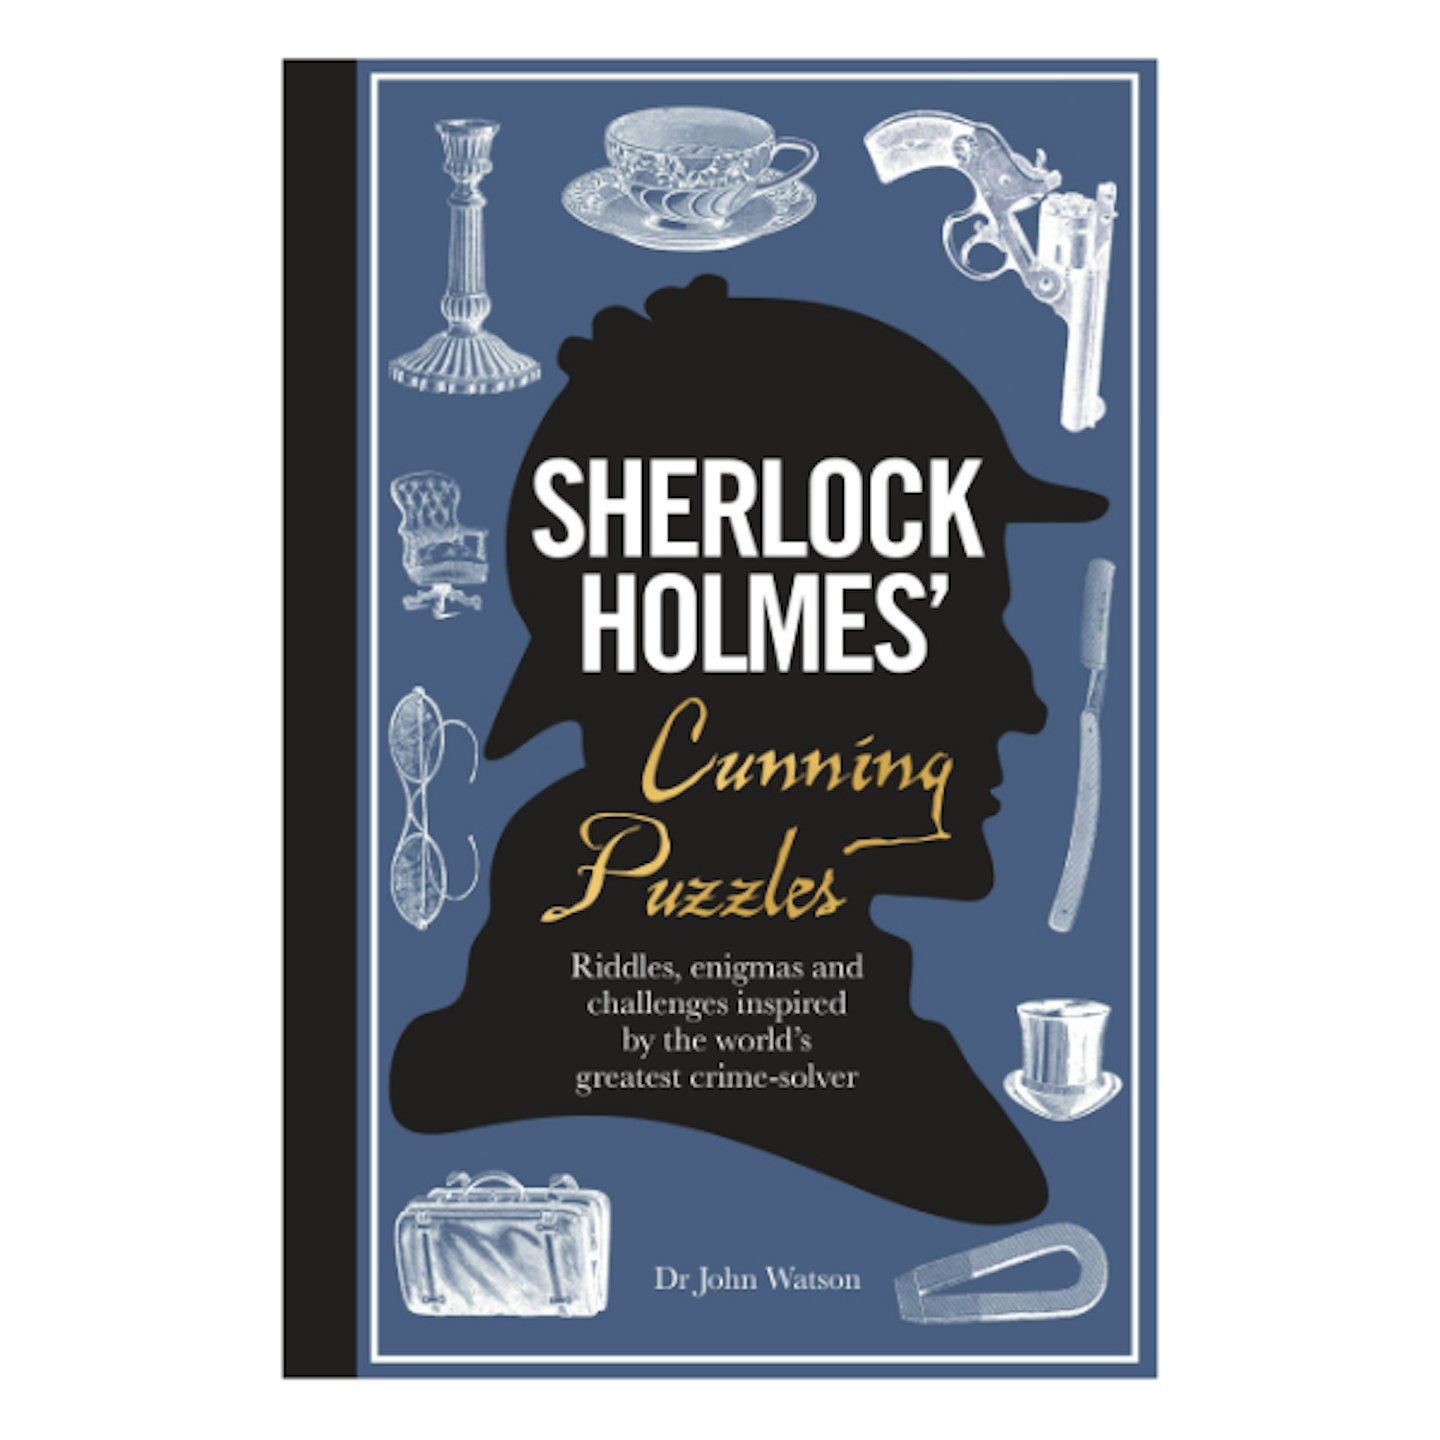 Sherlock Holmes' Cunning Puzzles